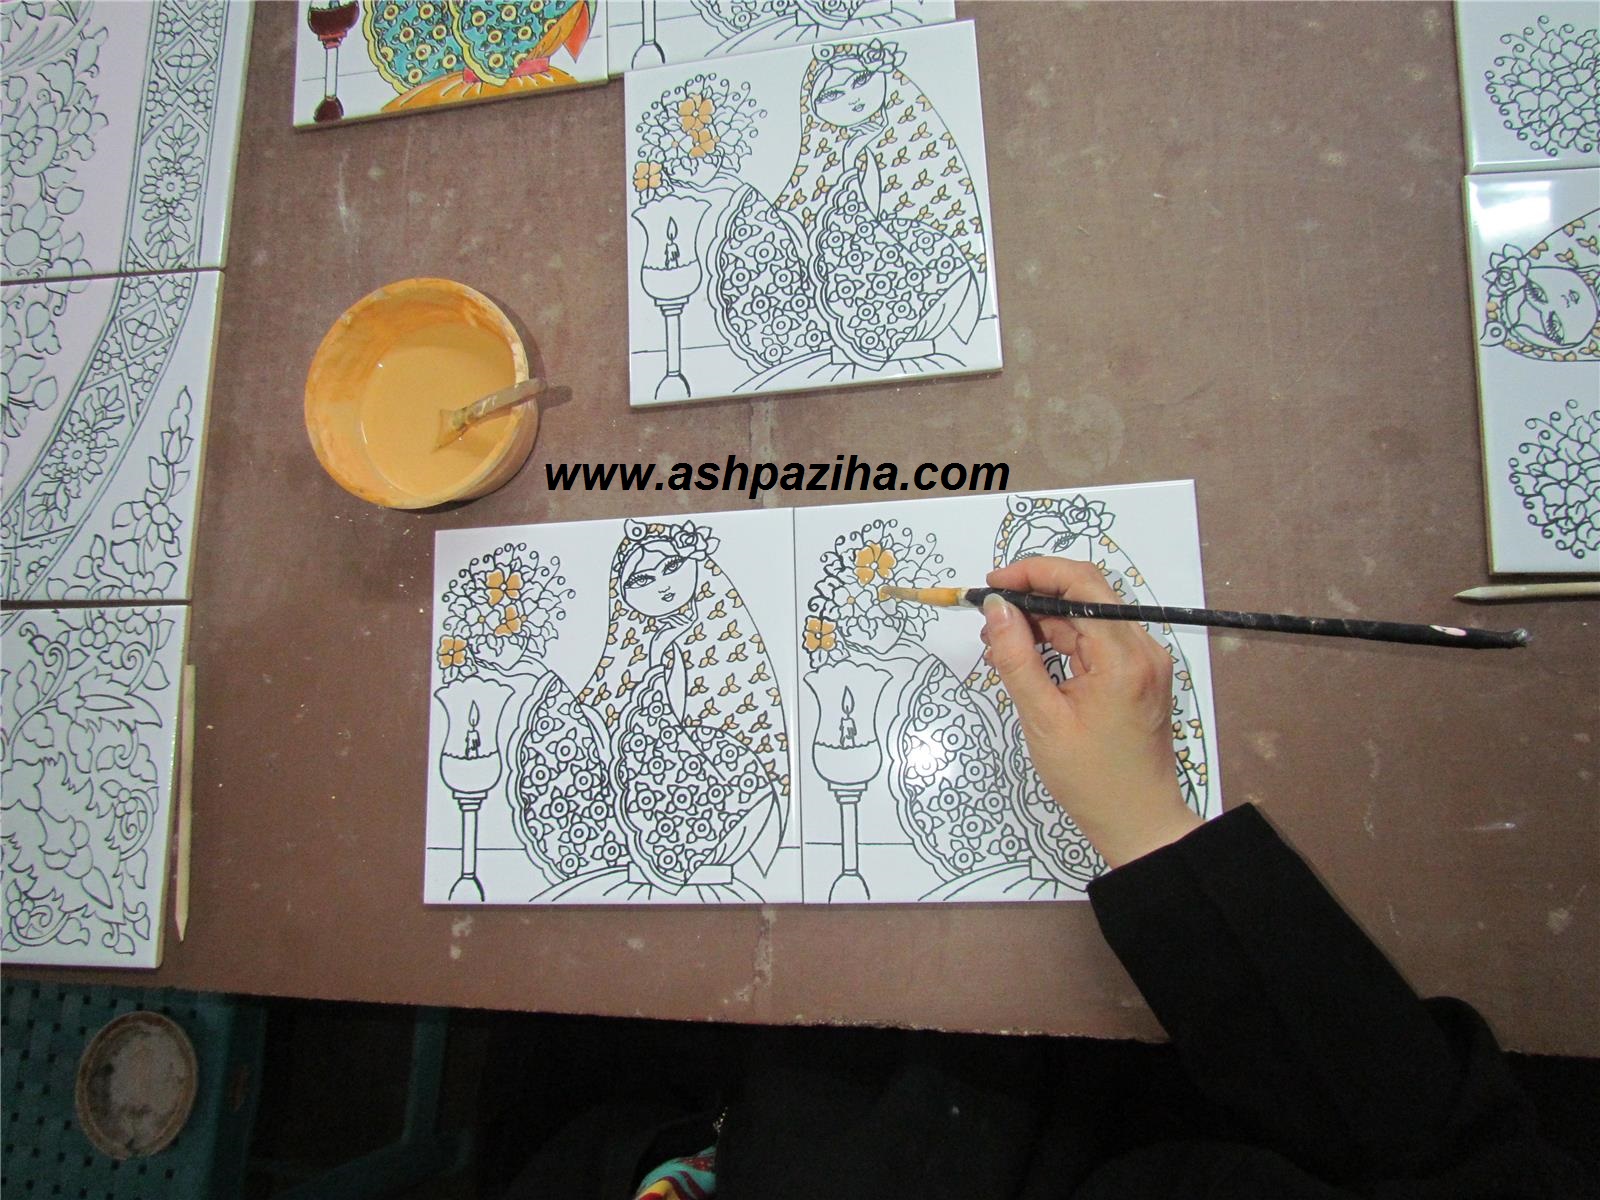 Educational - painting - and - designing - the - Tiles (14)